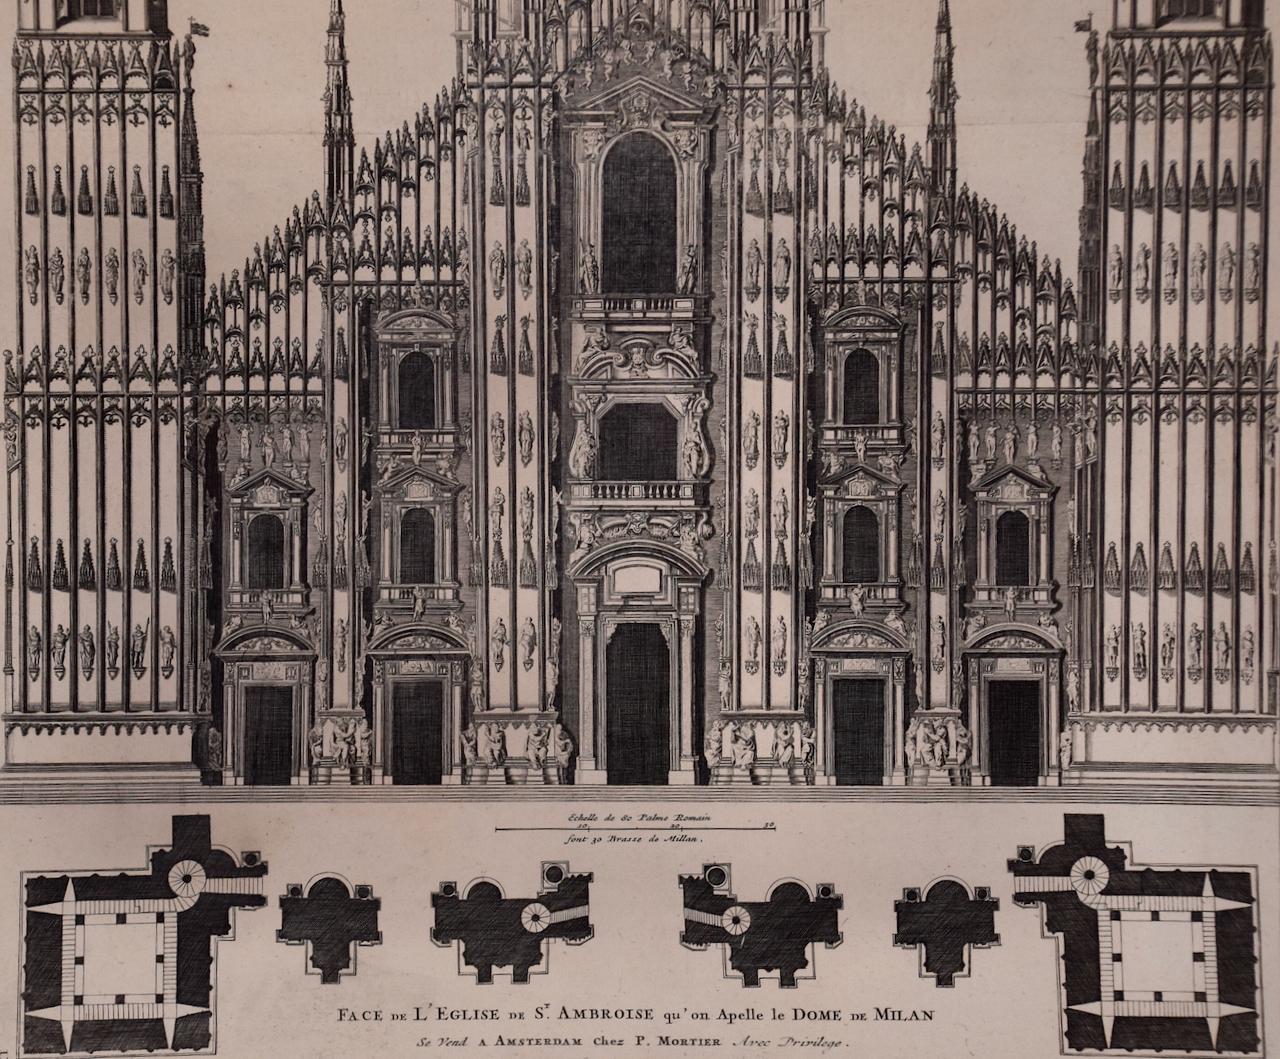 Milan Cathedral: A Framed 1704 Architectural Rendering by Mortier after Blaeu - Brown Still-Life Print by Pierre Mortier